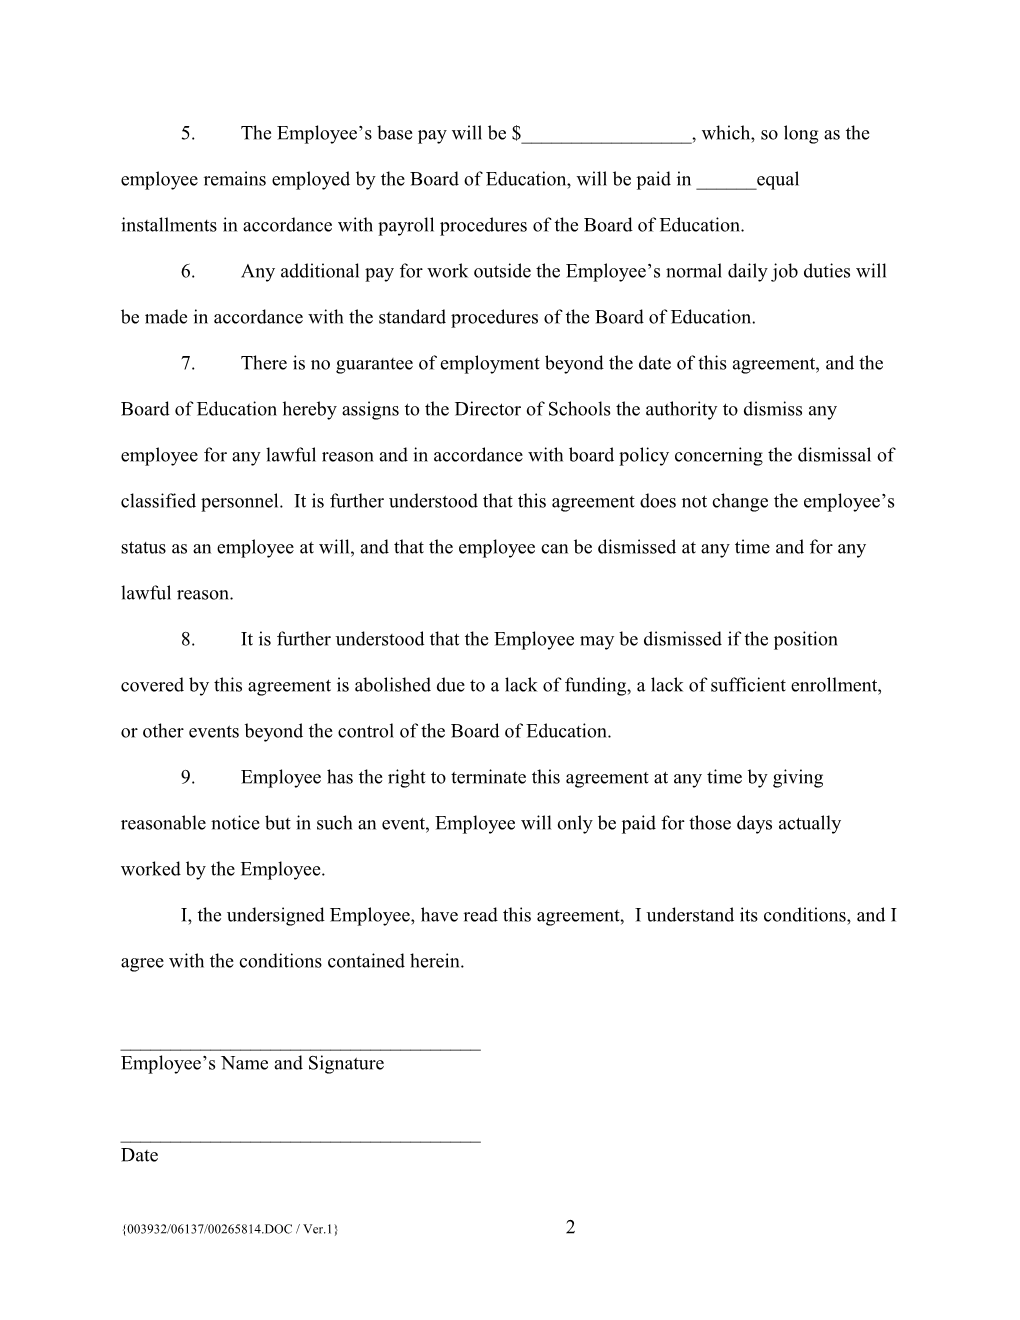 12-09-14 County Board of Education Non-Certificated Employee Agreement As Revised (00265814)